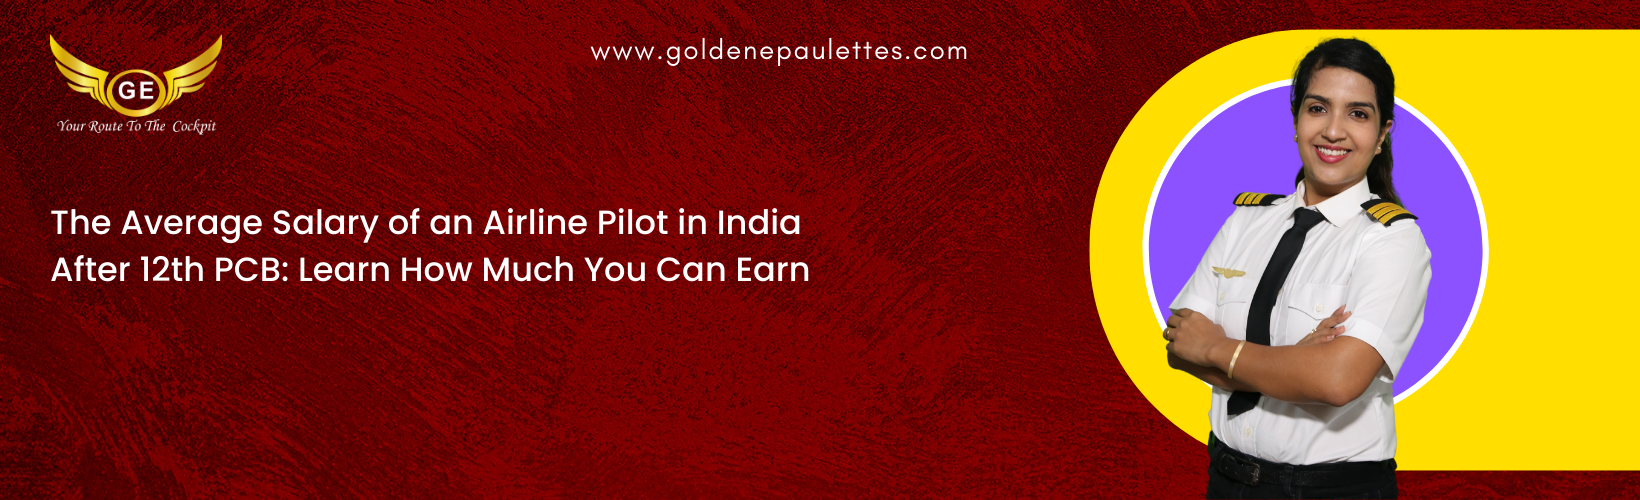 The Average Salary of a Pilot in India After 12th PCB